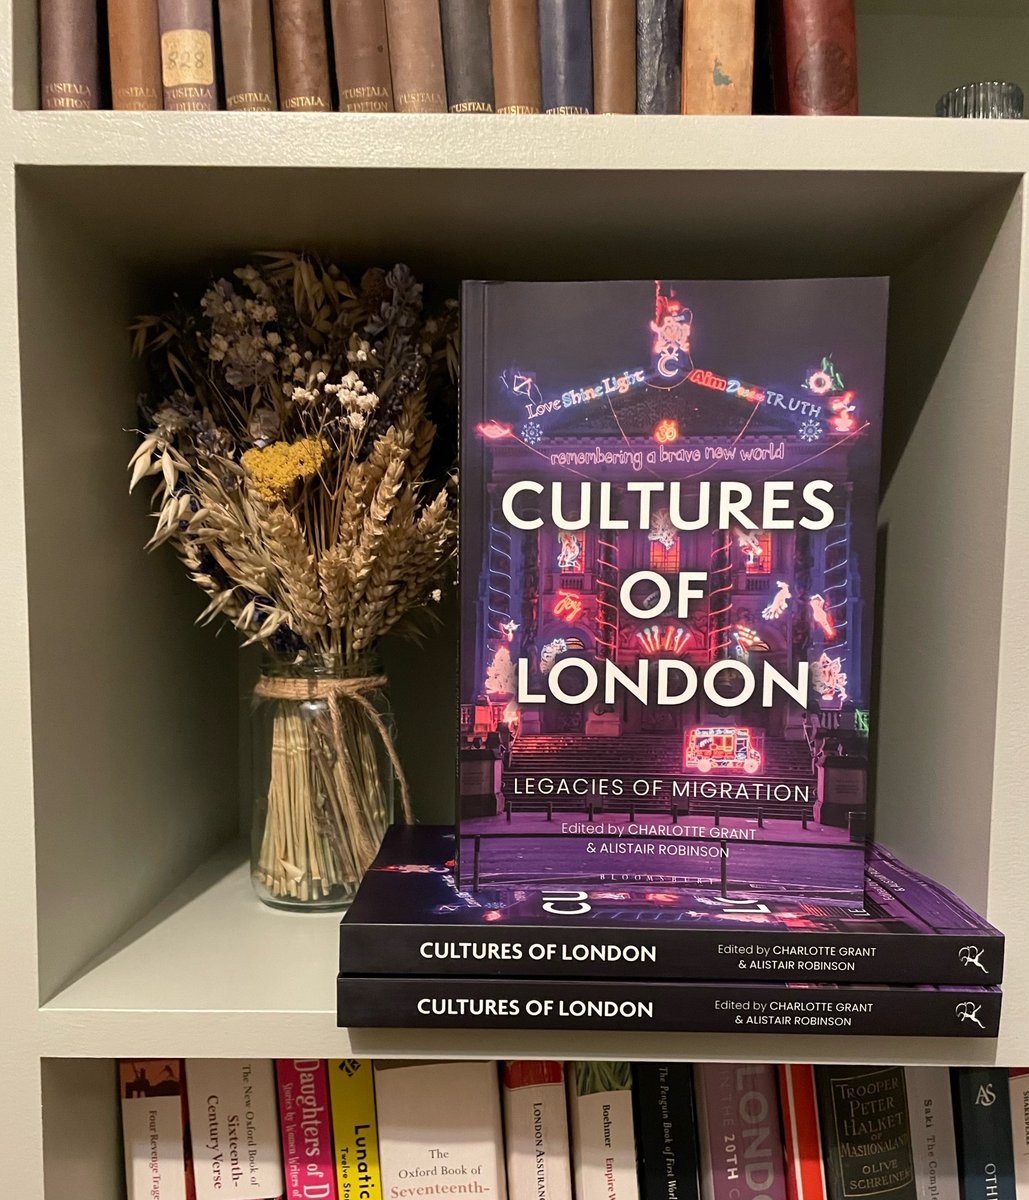 Great to finally see this volume in the flesh (and to display them on my lovely sage green shelves). A real pleasure to edit this with Charlotte Grant and a privilege to work with such a great bunch of contributors. bloomsbury.com/uk/cultures-of…